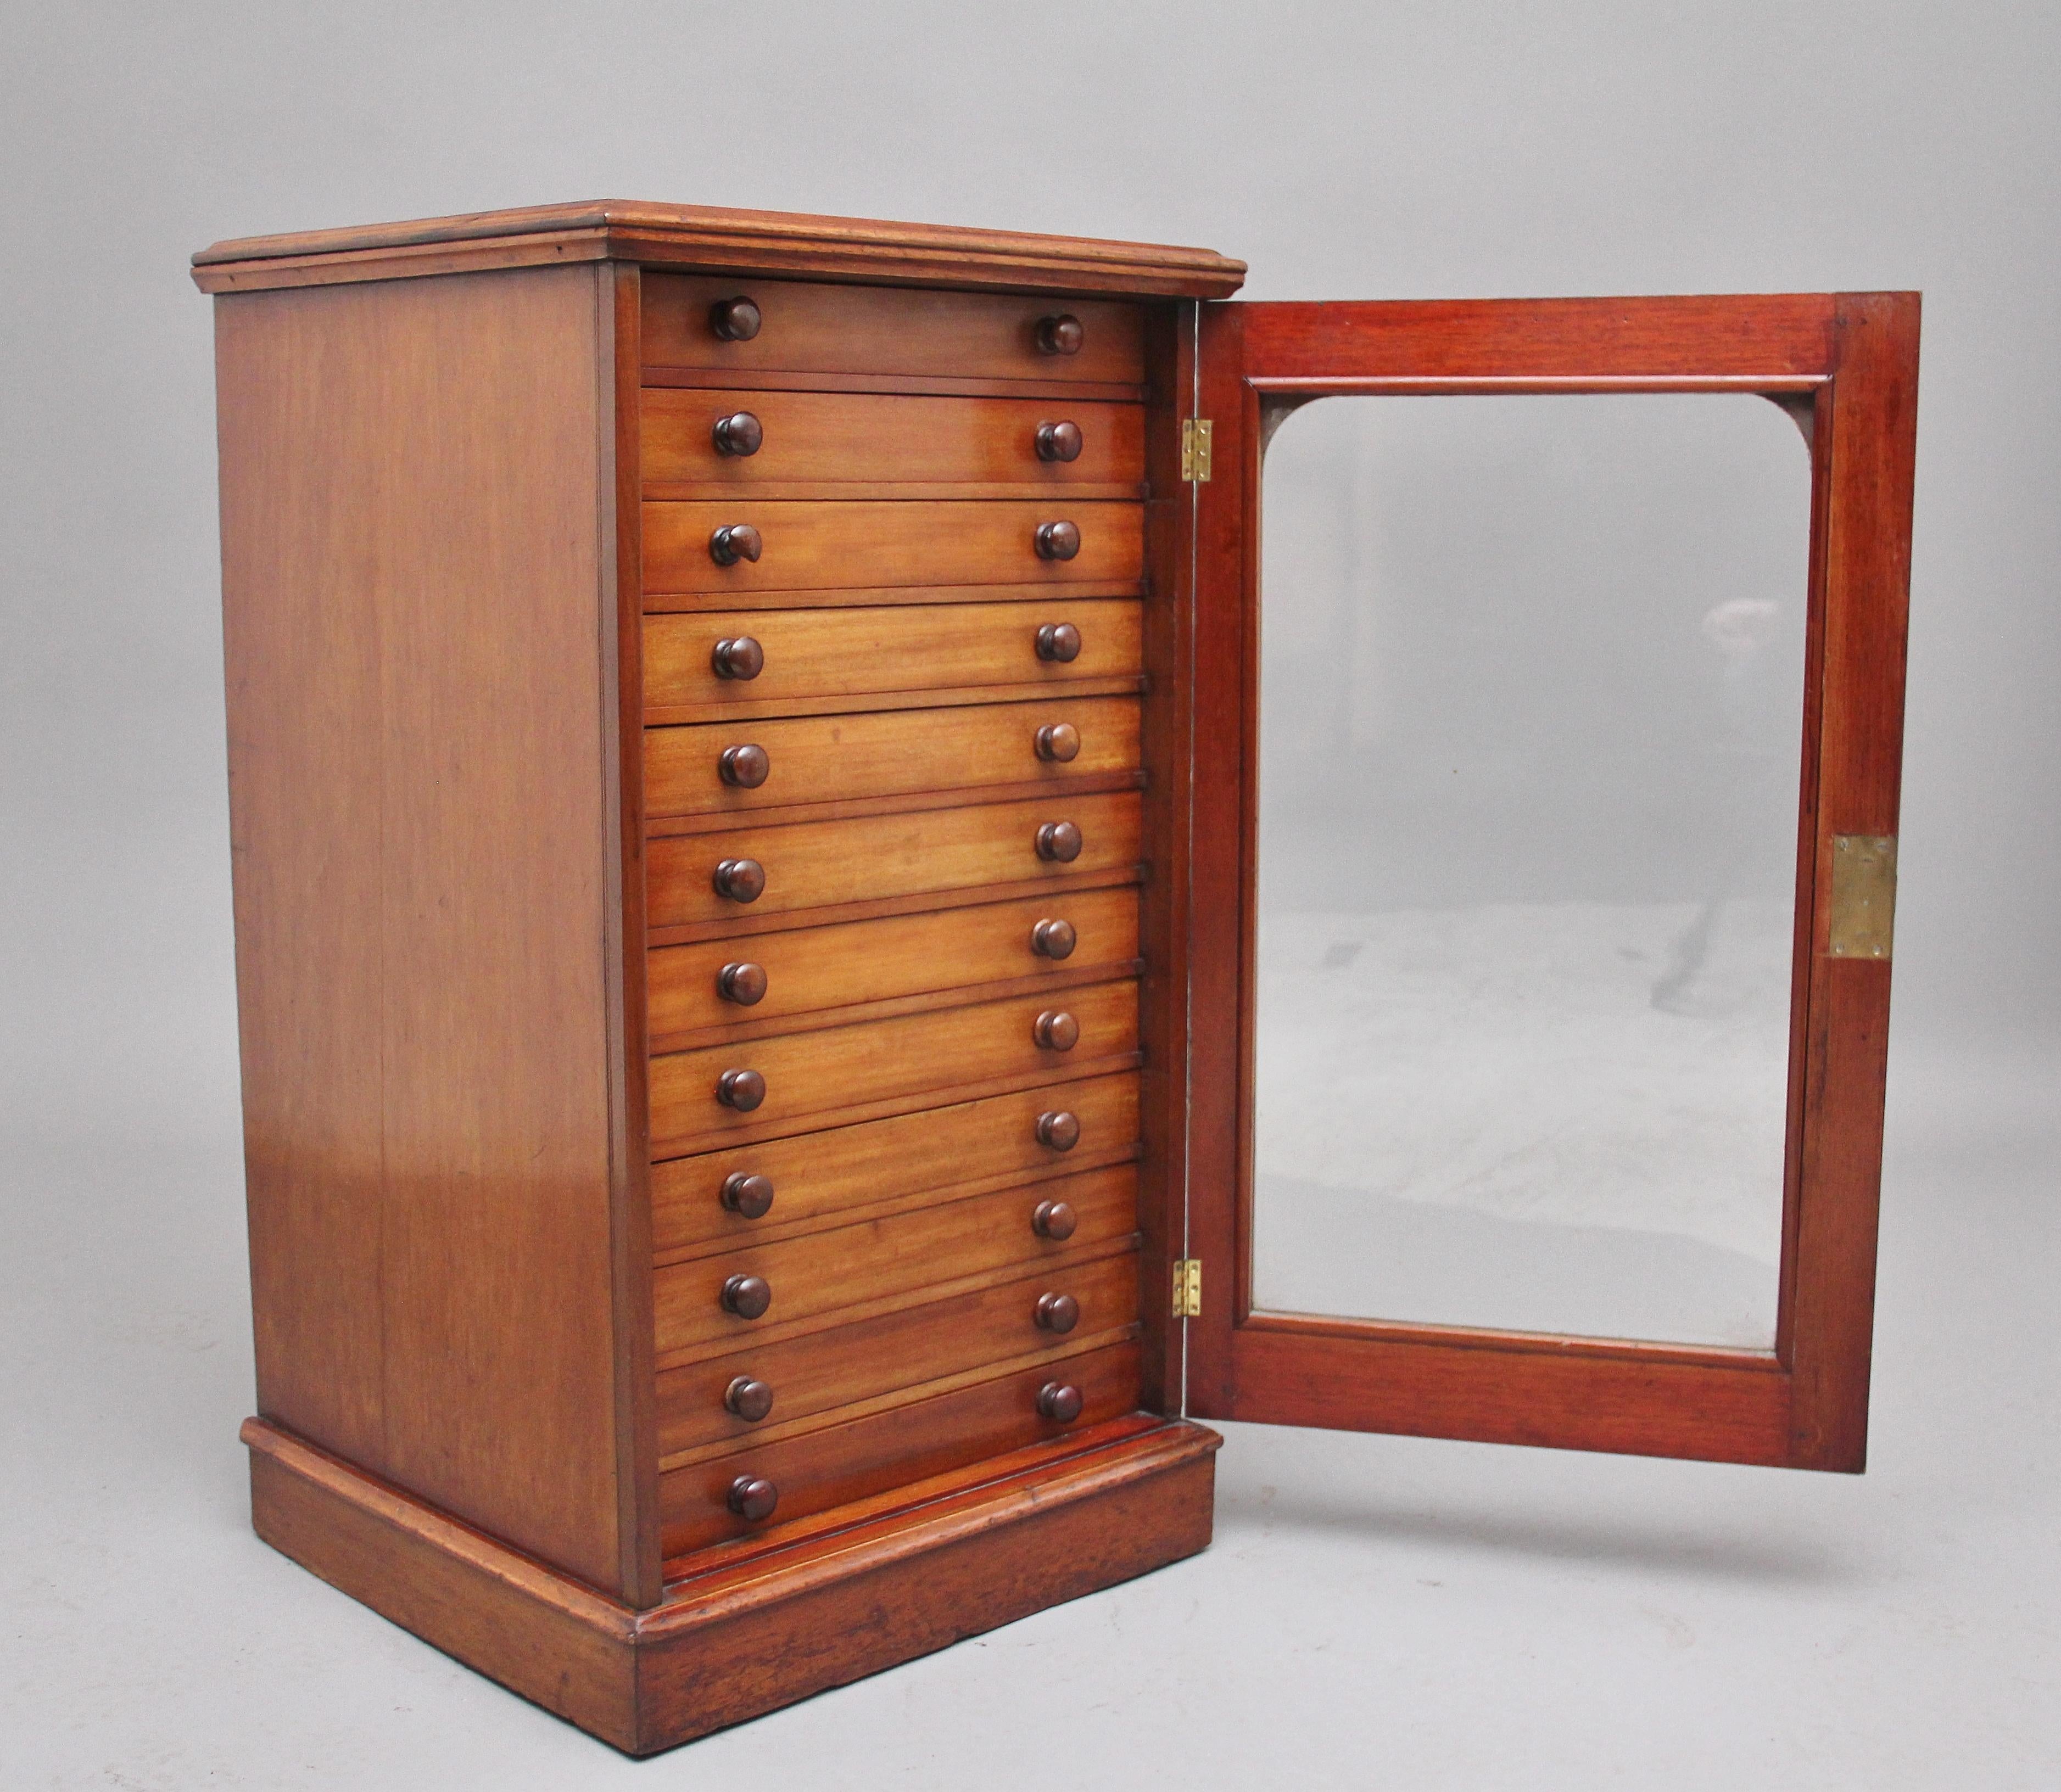 19th Century mahogany collectors / specimen cabinet, the thumb moulded edge top above a single glazed door with arched moulding surround opening to reveal twelve glass topped drawers, all with the original turned wooden knob handles, all the drawers